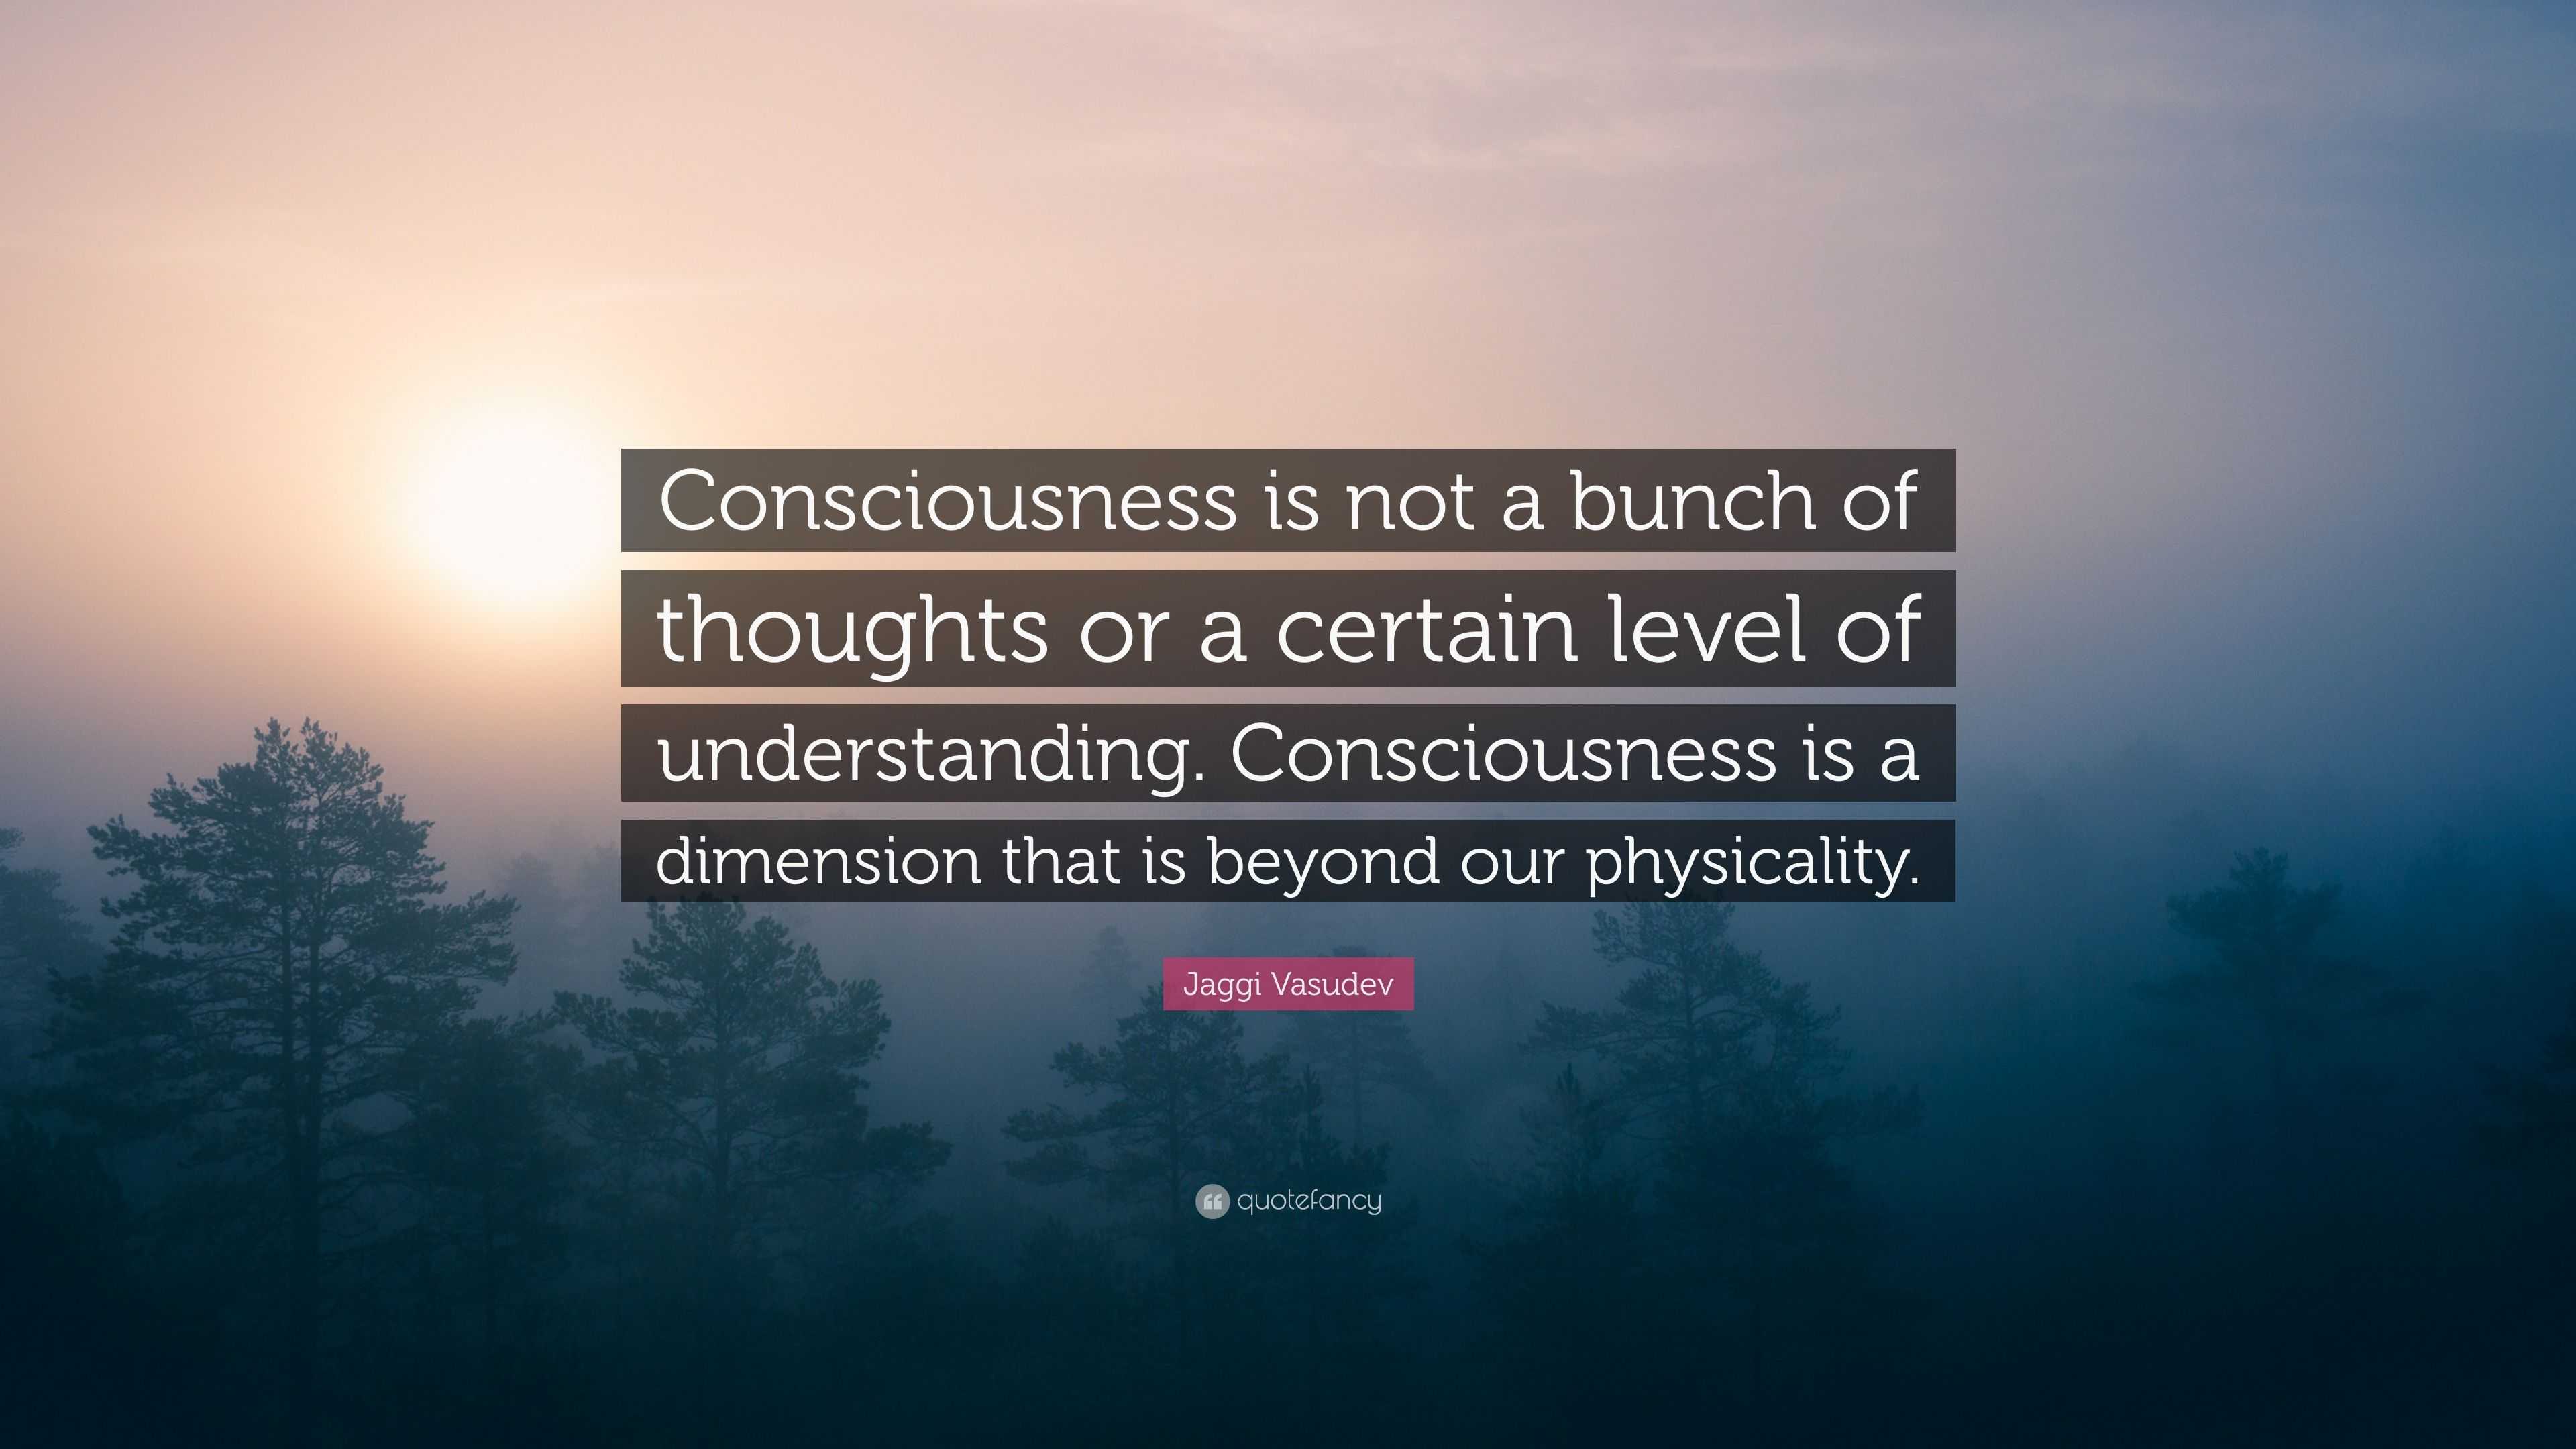 Jaggi Vasudev Quote: “Consciousness is not a bunch of thoughts or a ...